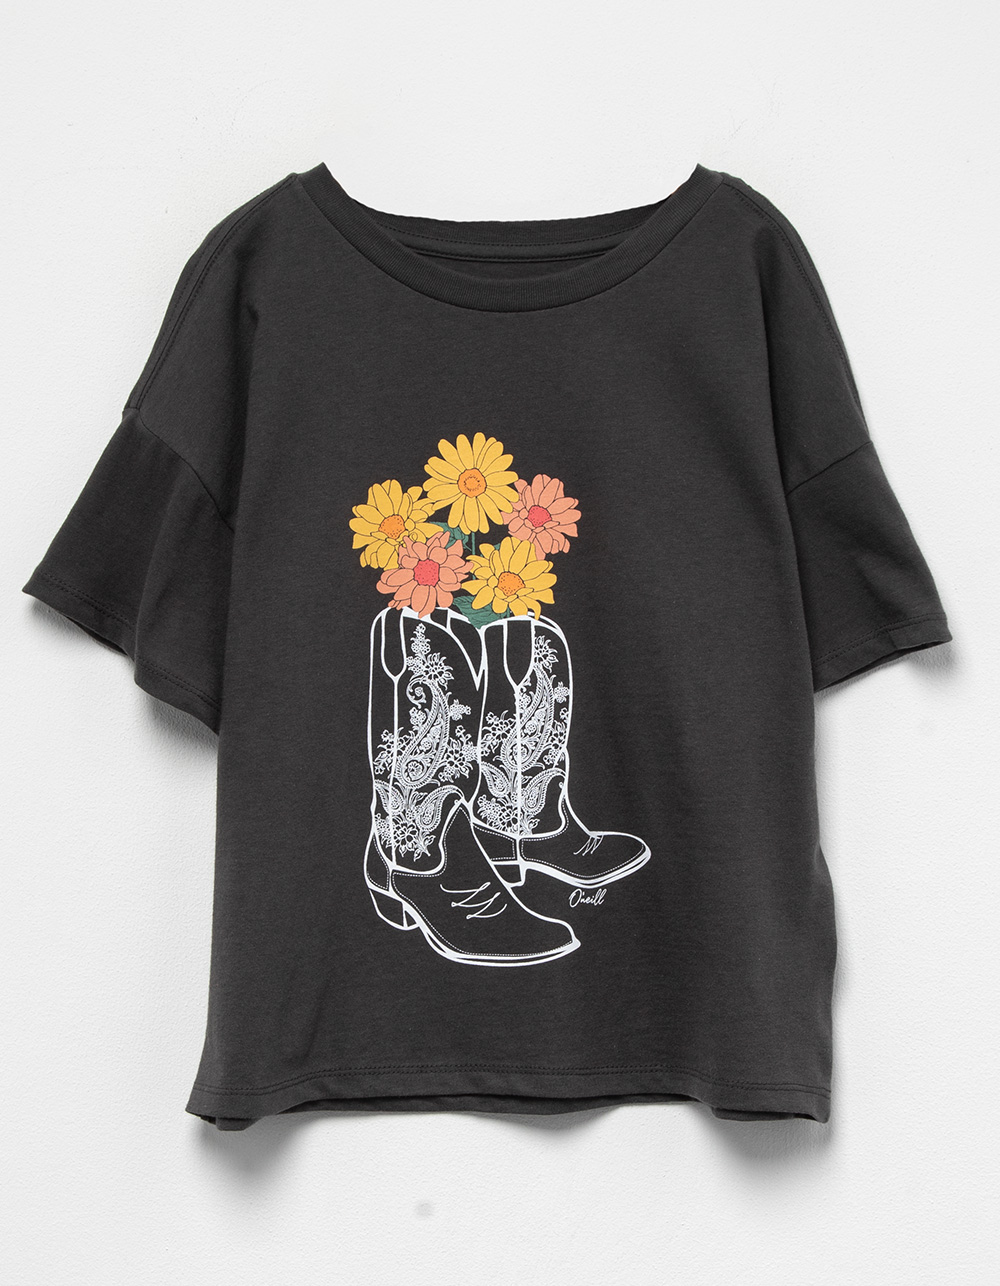 O'NEILL Out West Girls Tee - WASHED BLACK | Tillys